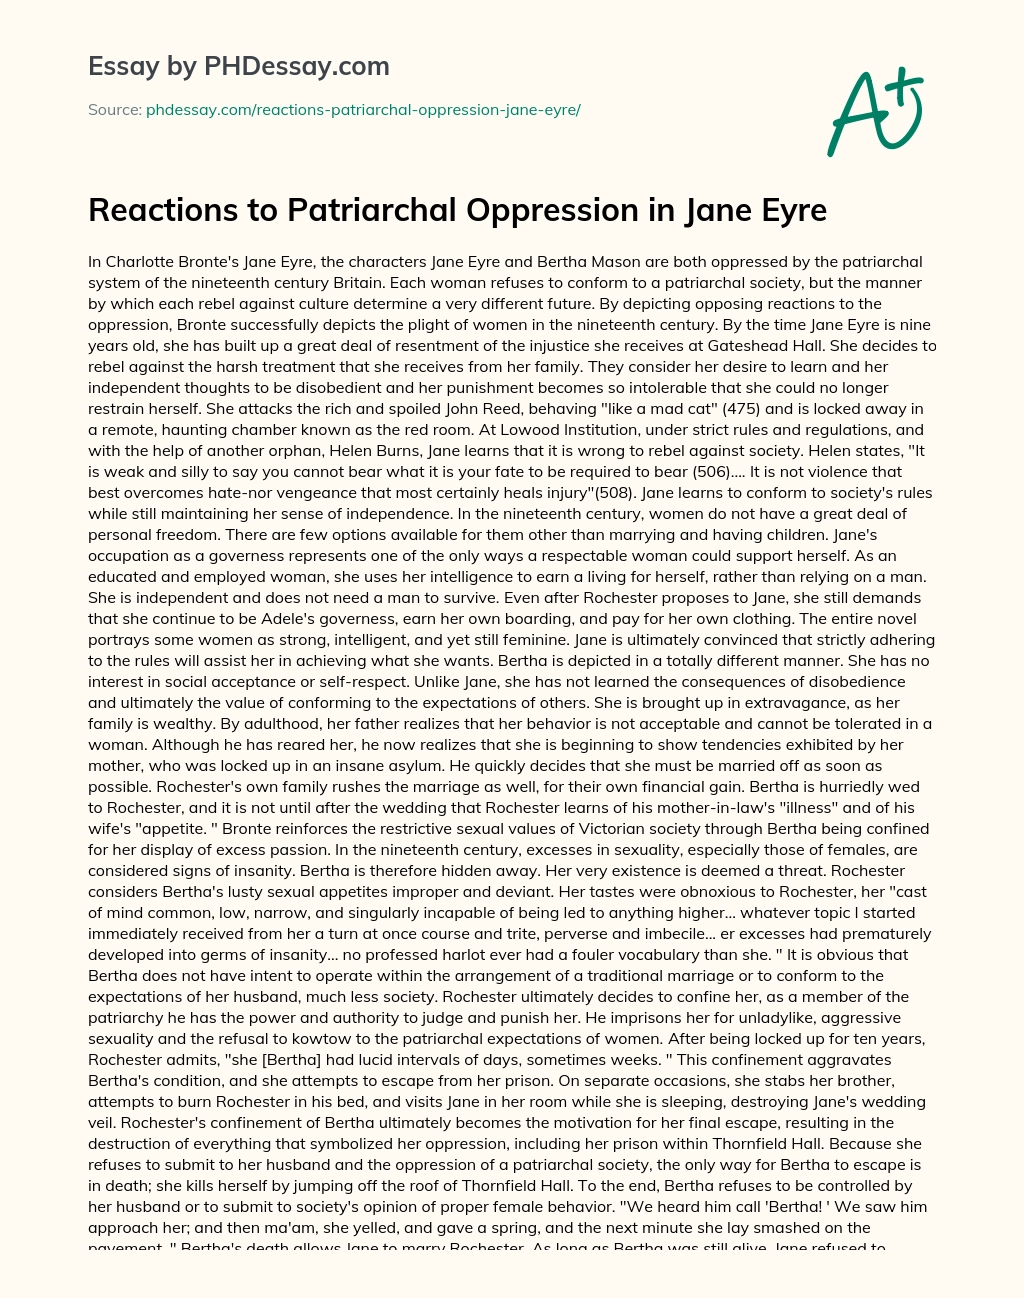 Reactions to Patriarchal Oppression in Jane Eyre essay